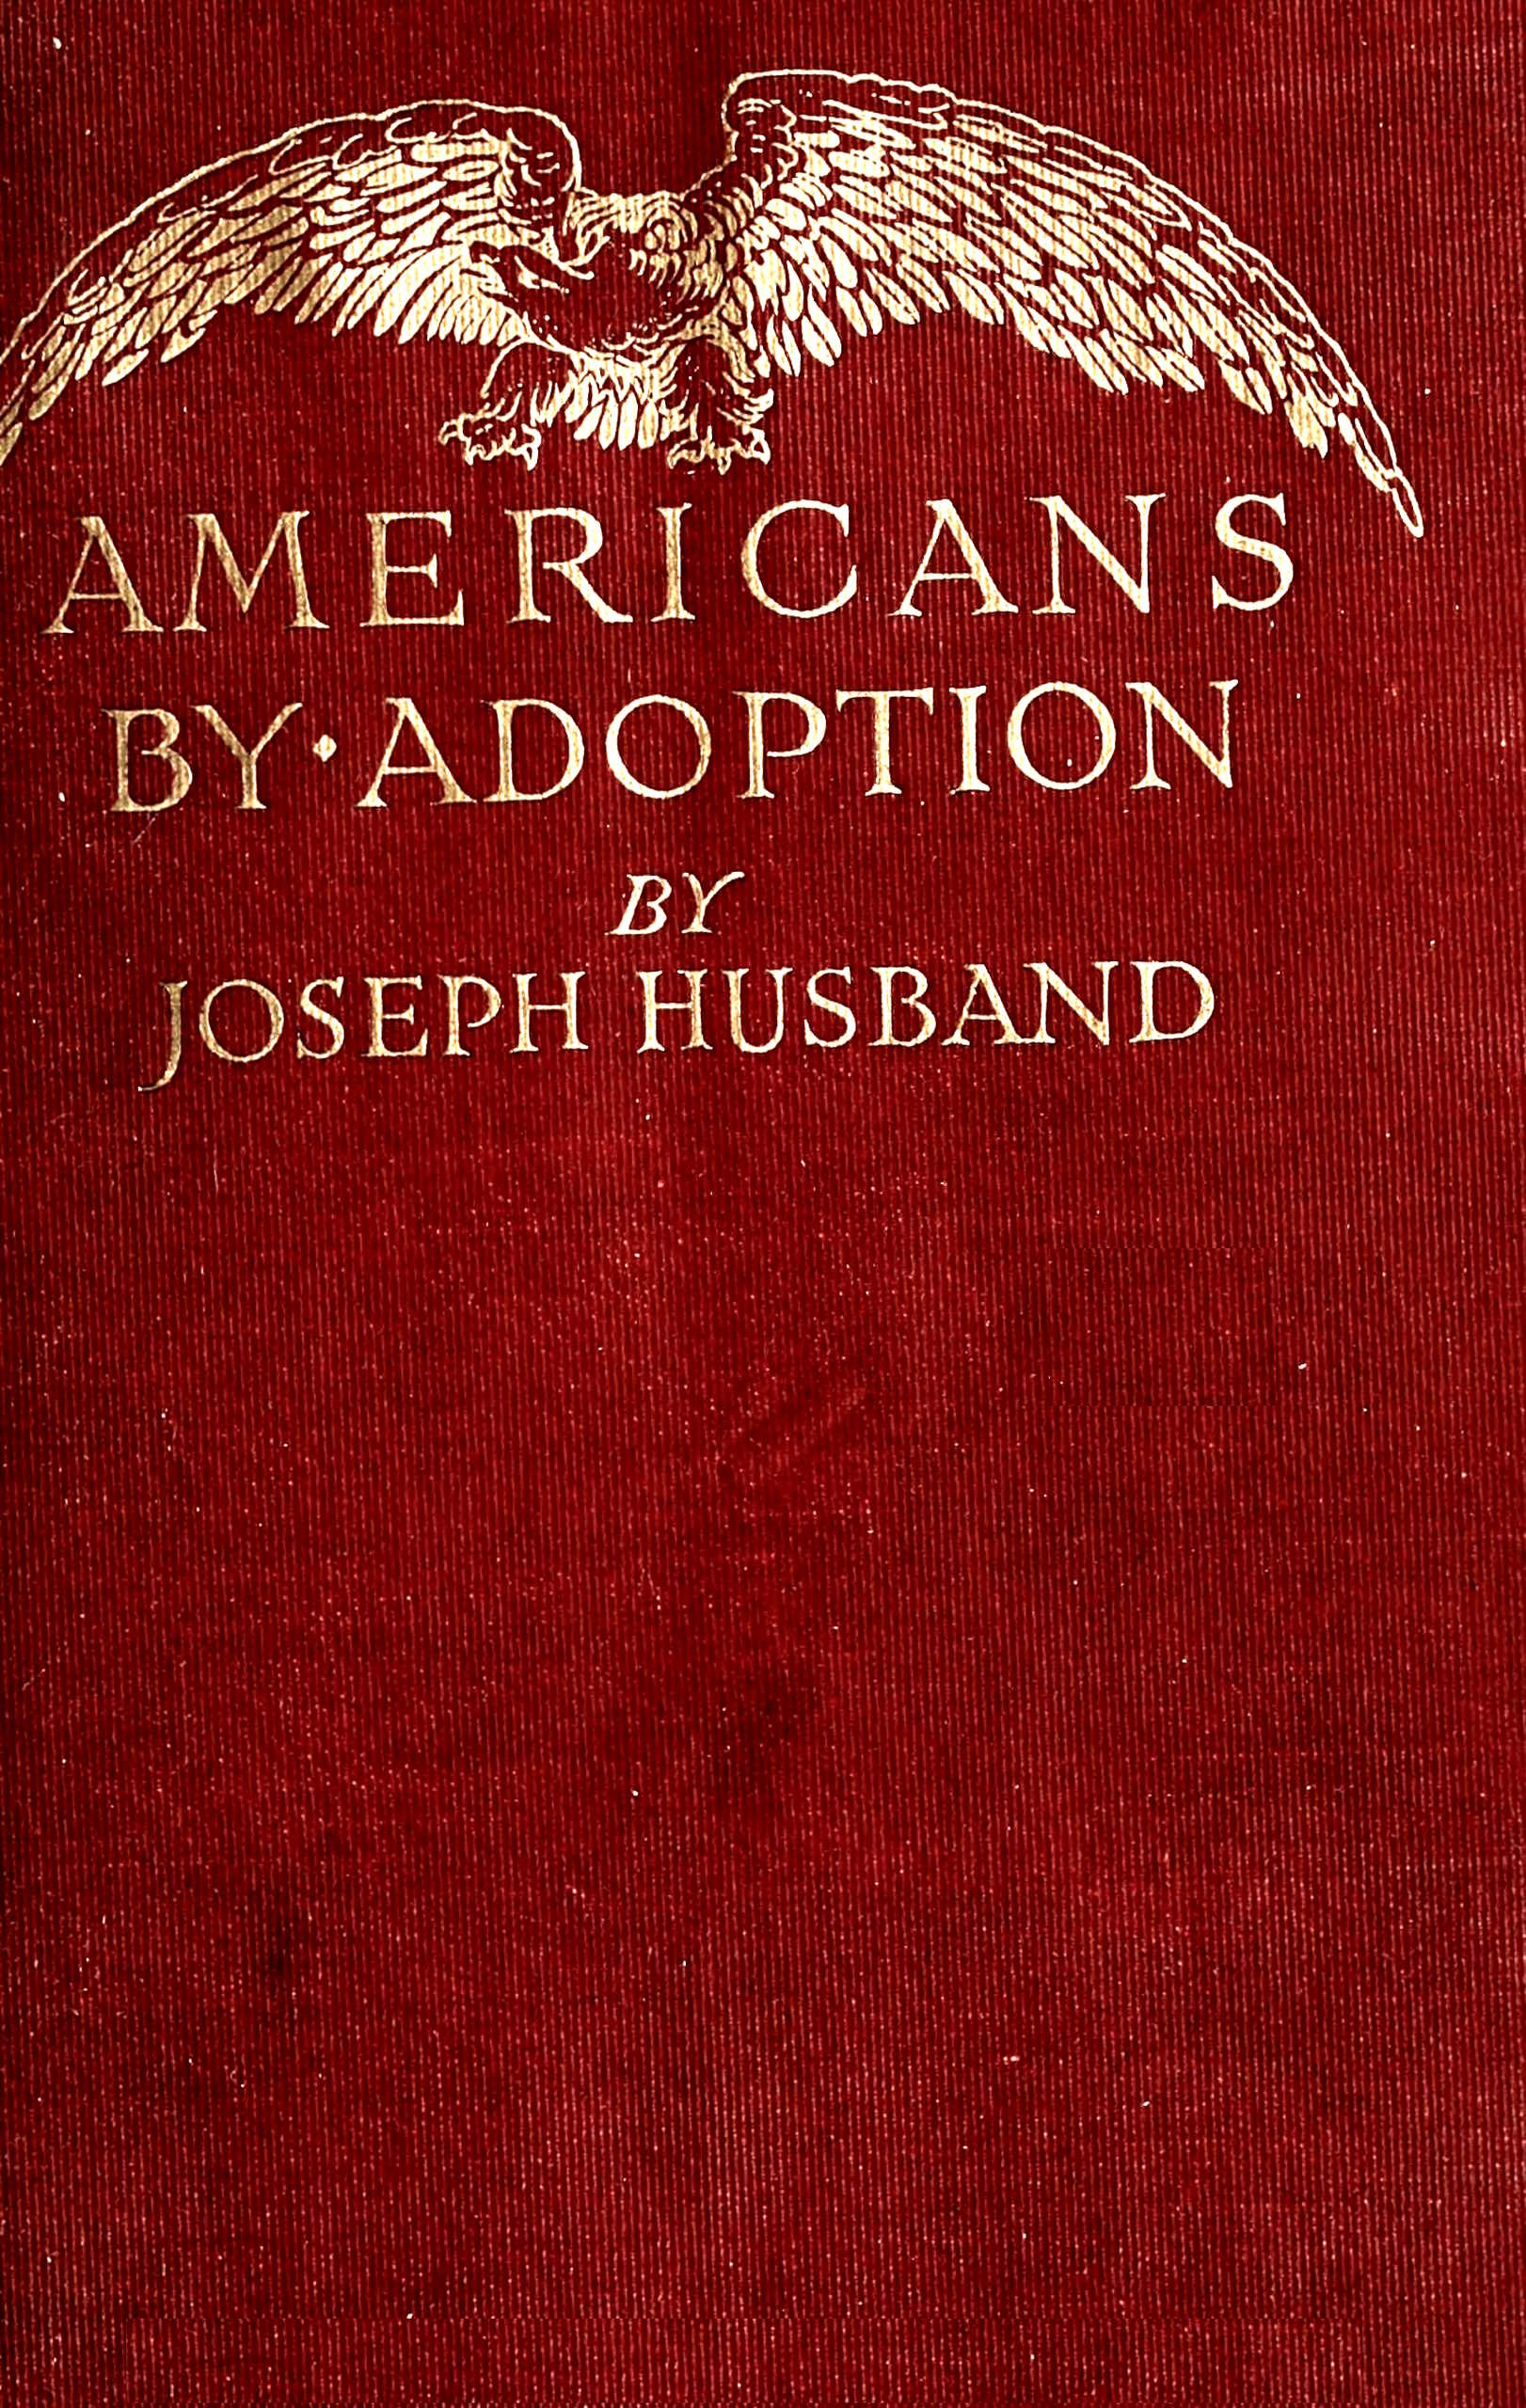 Americans by adoption